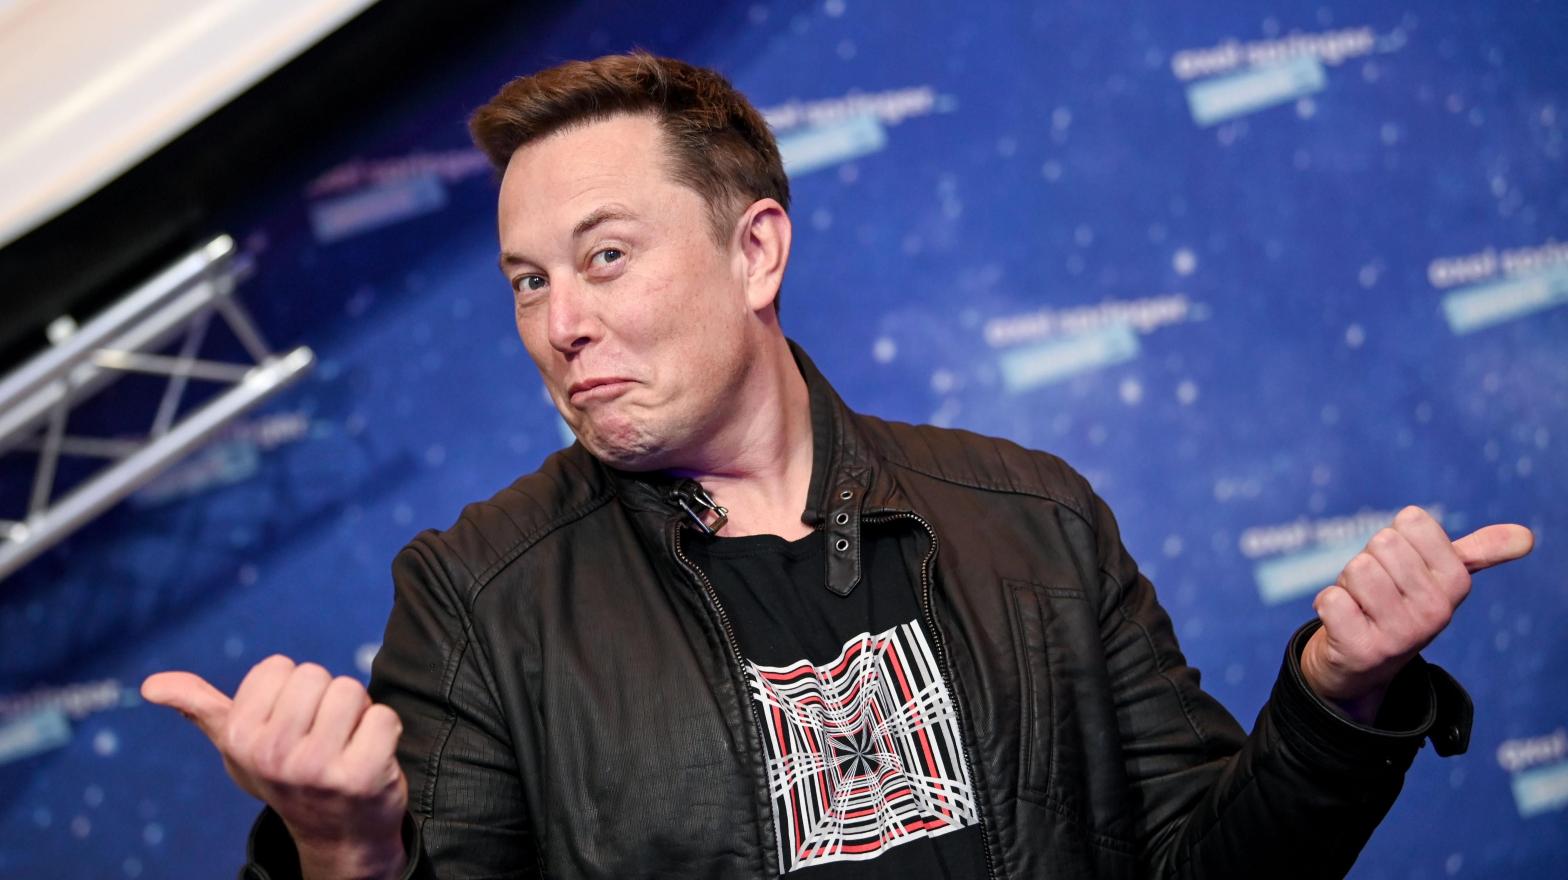 This will be the first time Elon Musk directly addresses Twitter employees. (Photo: Britta Pedersen / AFP, Getty Images)